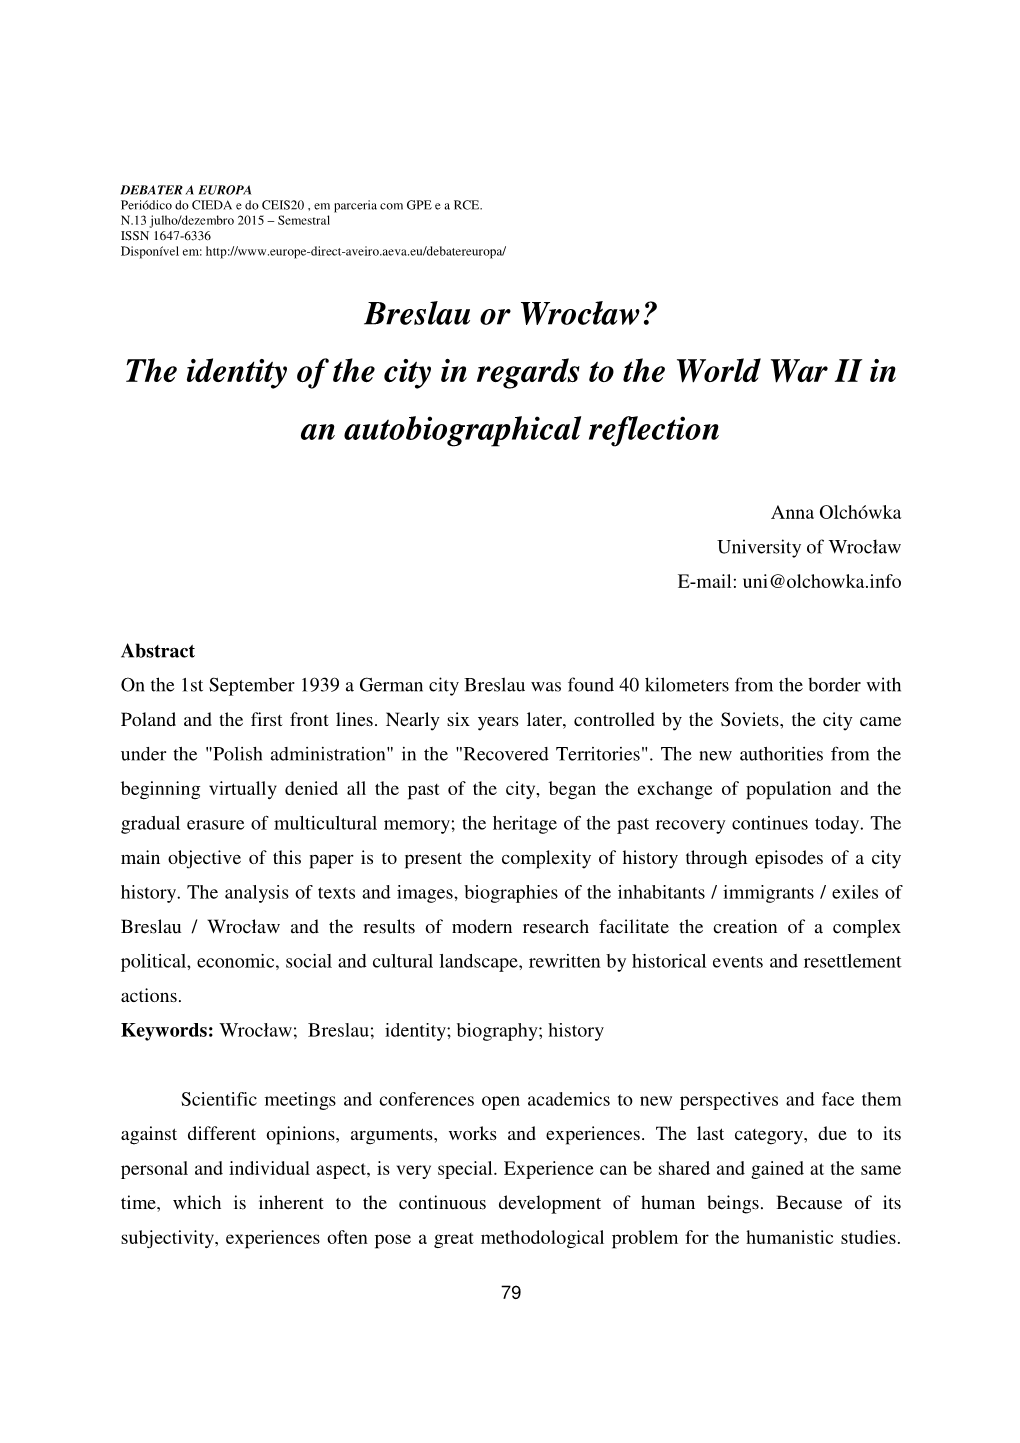 Breslau Or Wrocław? the Identity of the City in Regards to the World War II in an Autobiographical Reflection